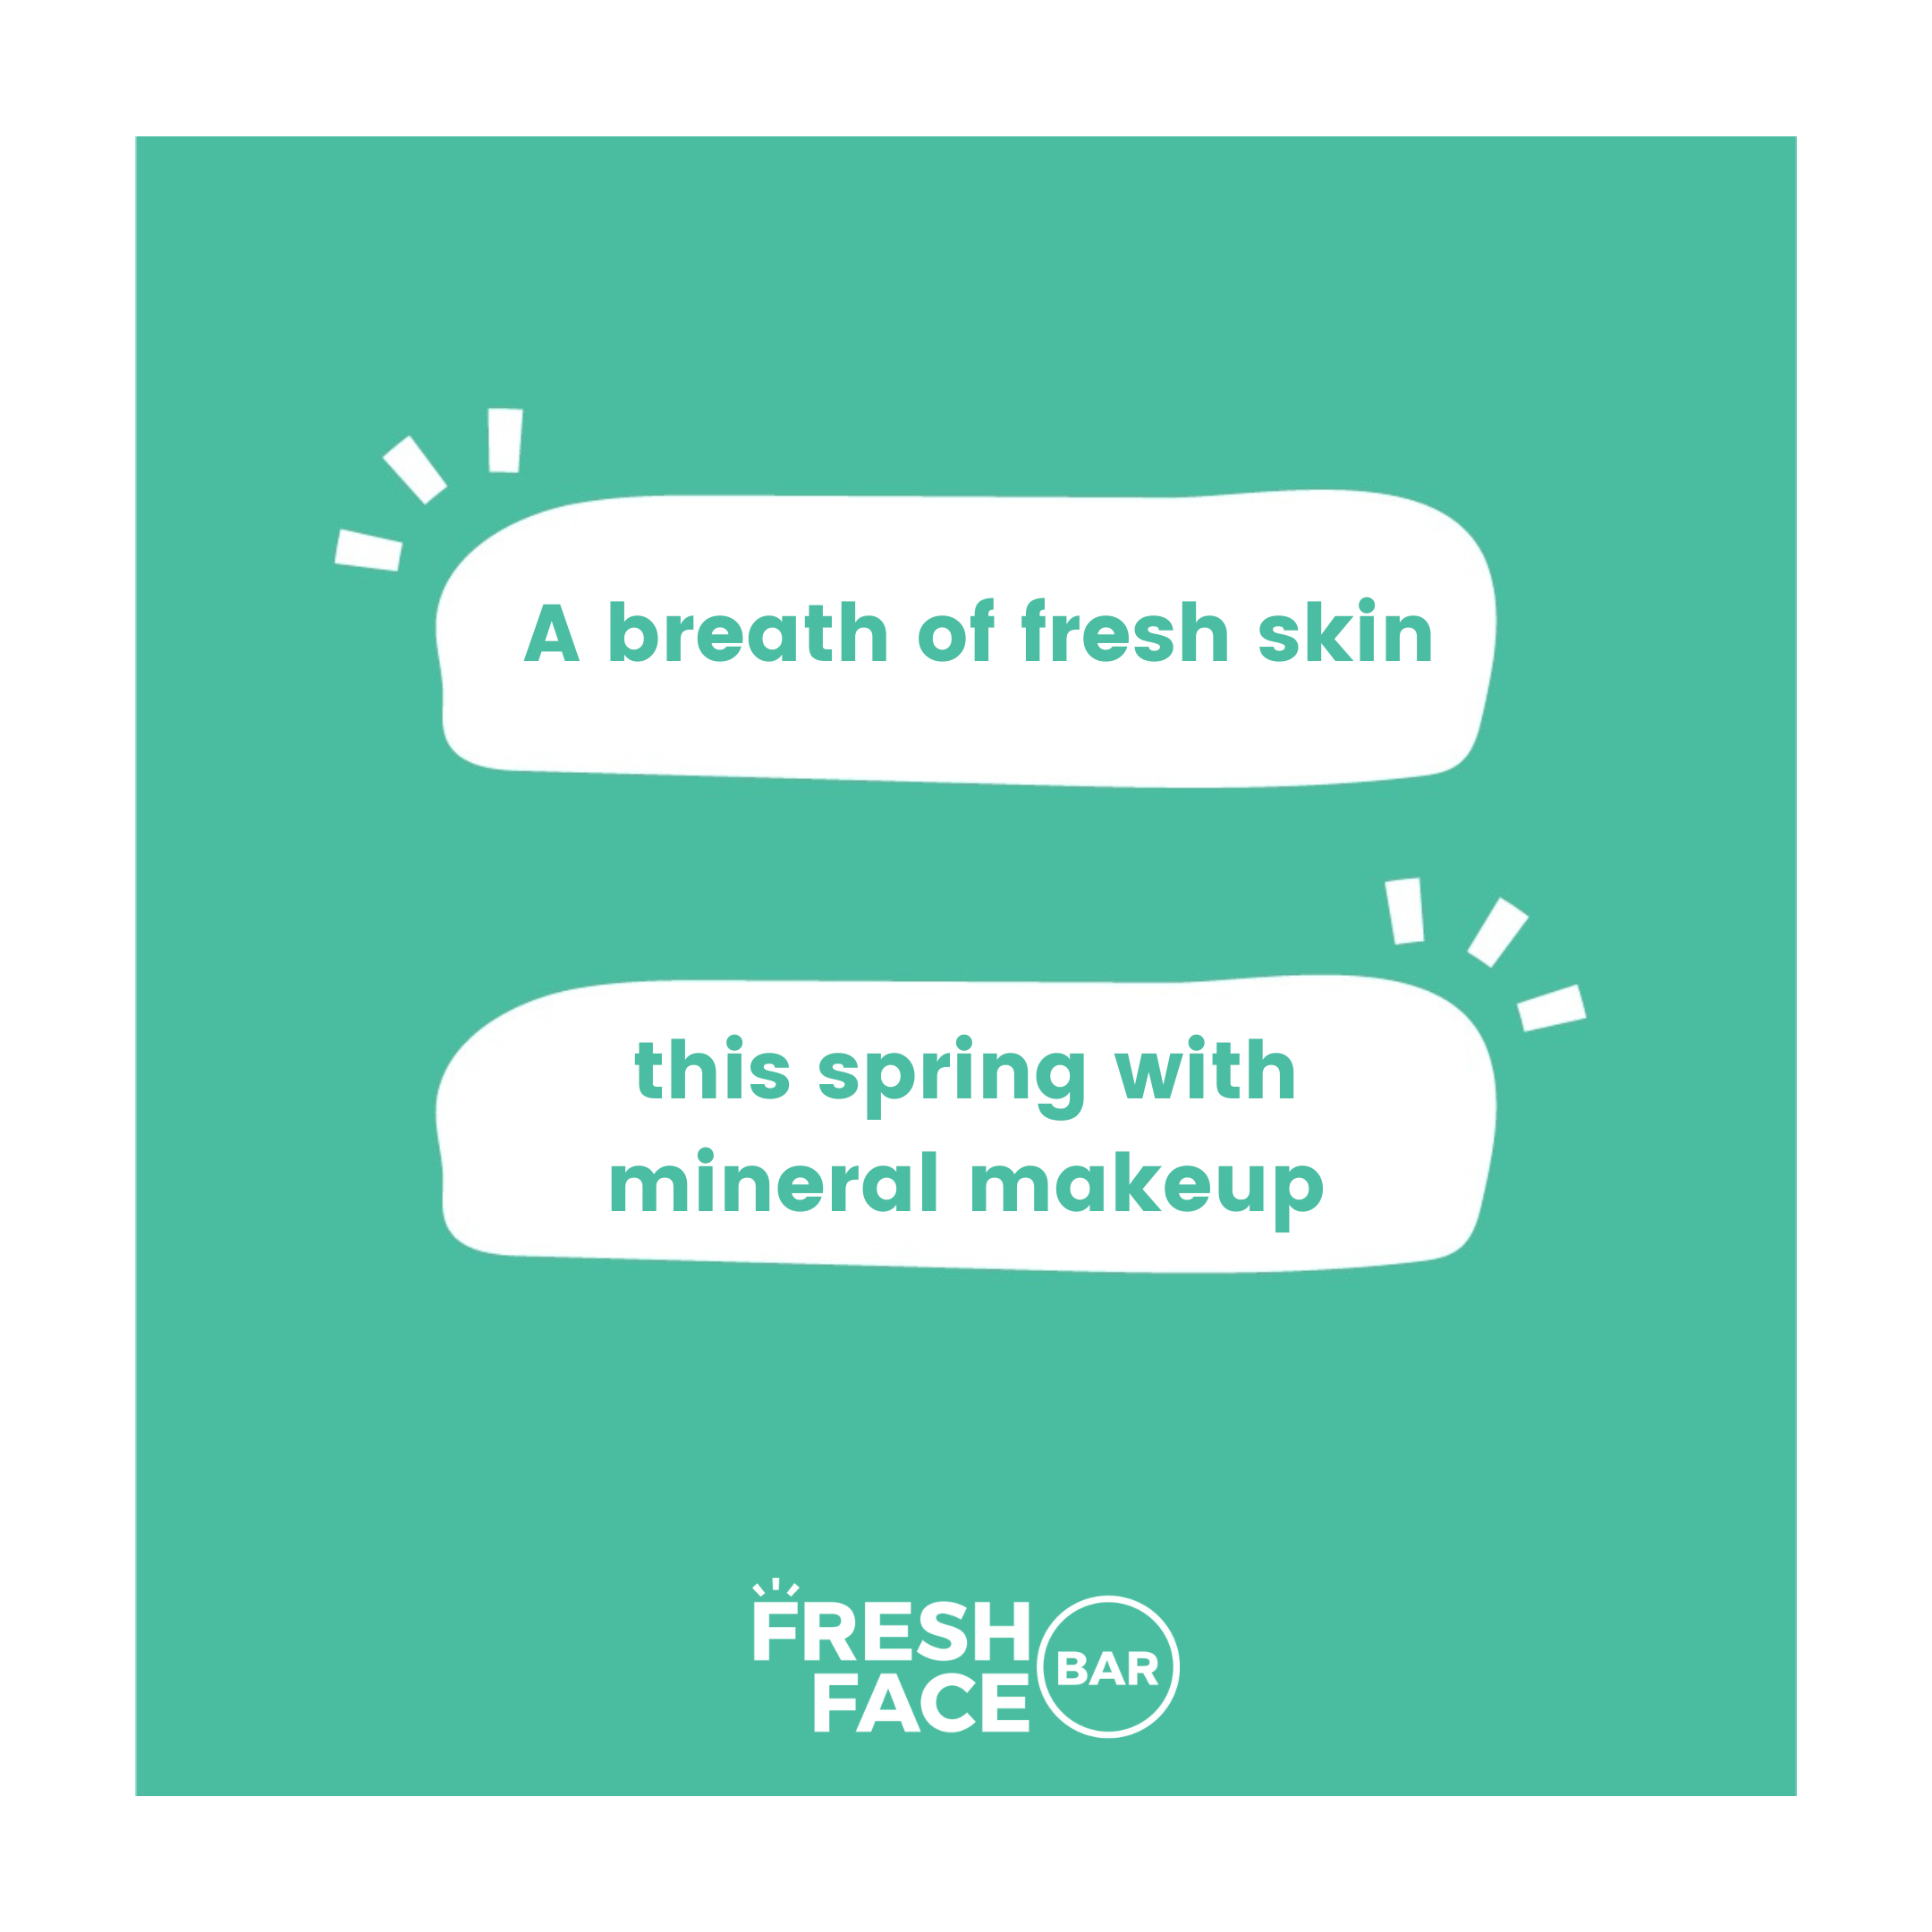 How Mineral Makeup is a breath of fresh skin for the Spring Season!